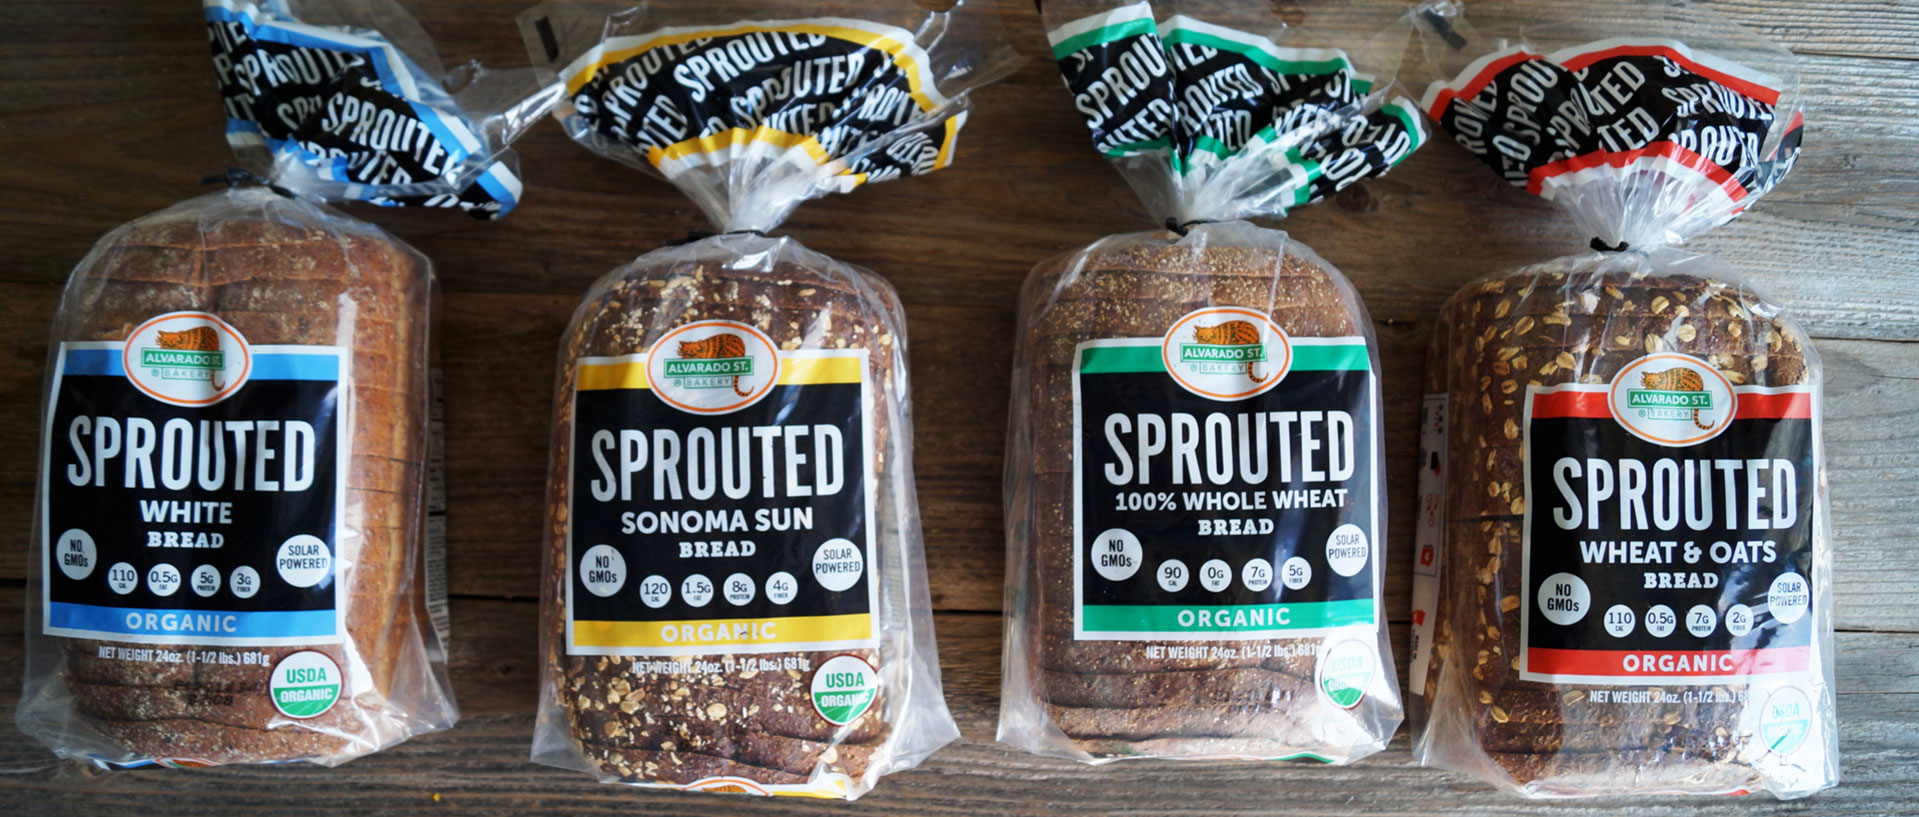 can dogs eat sprouted grain bread